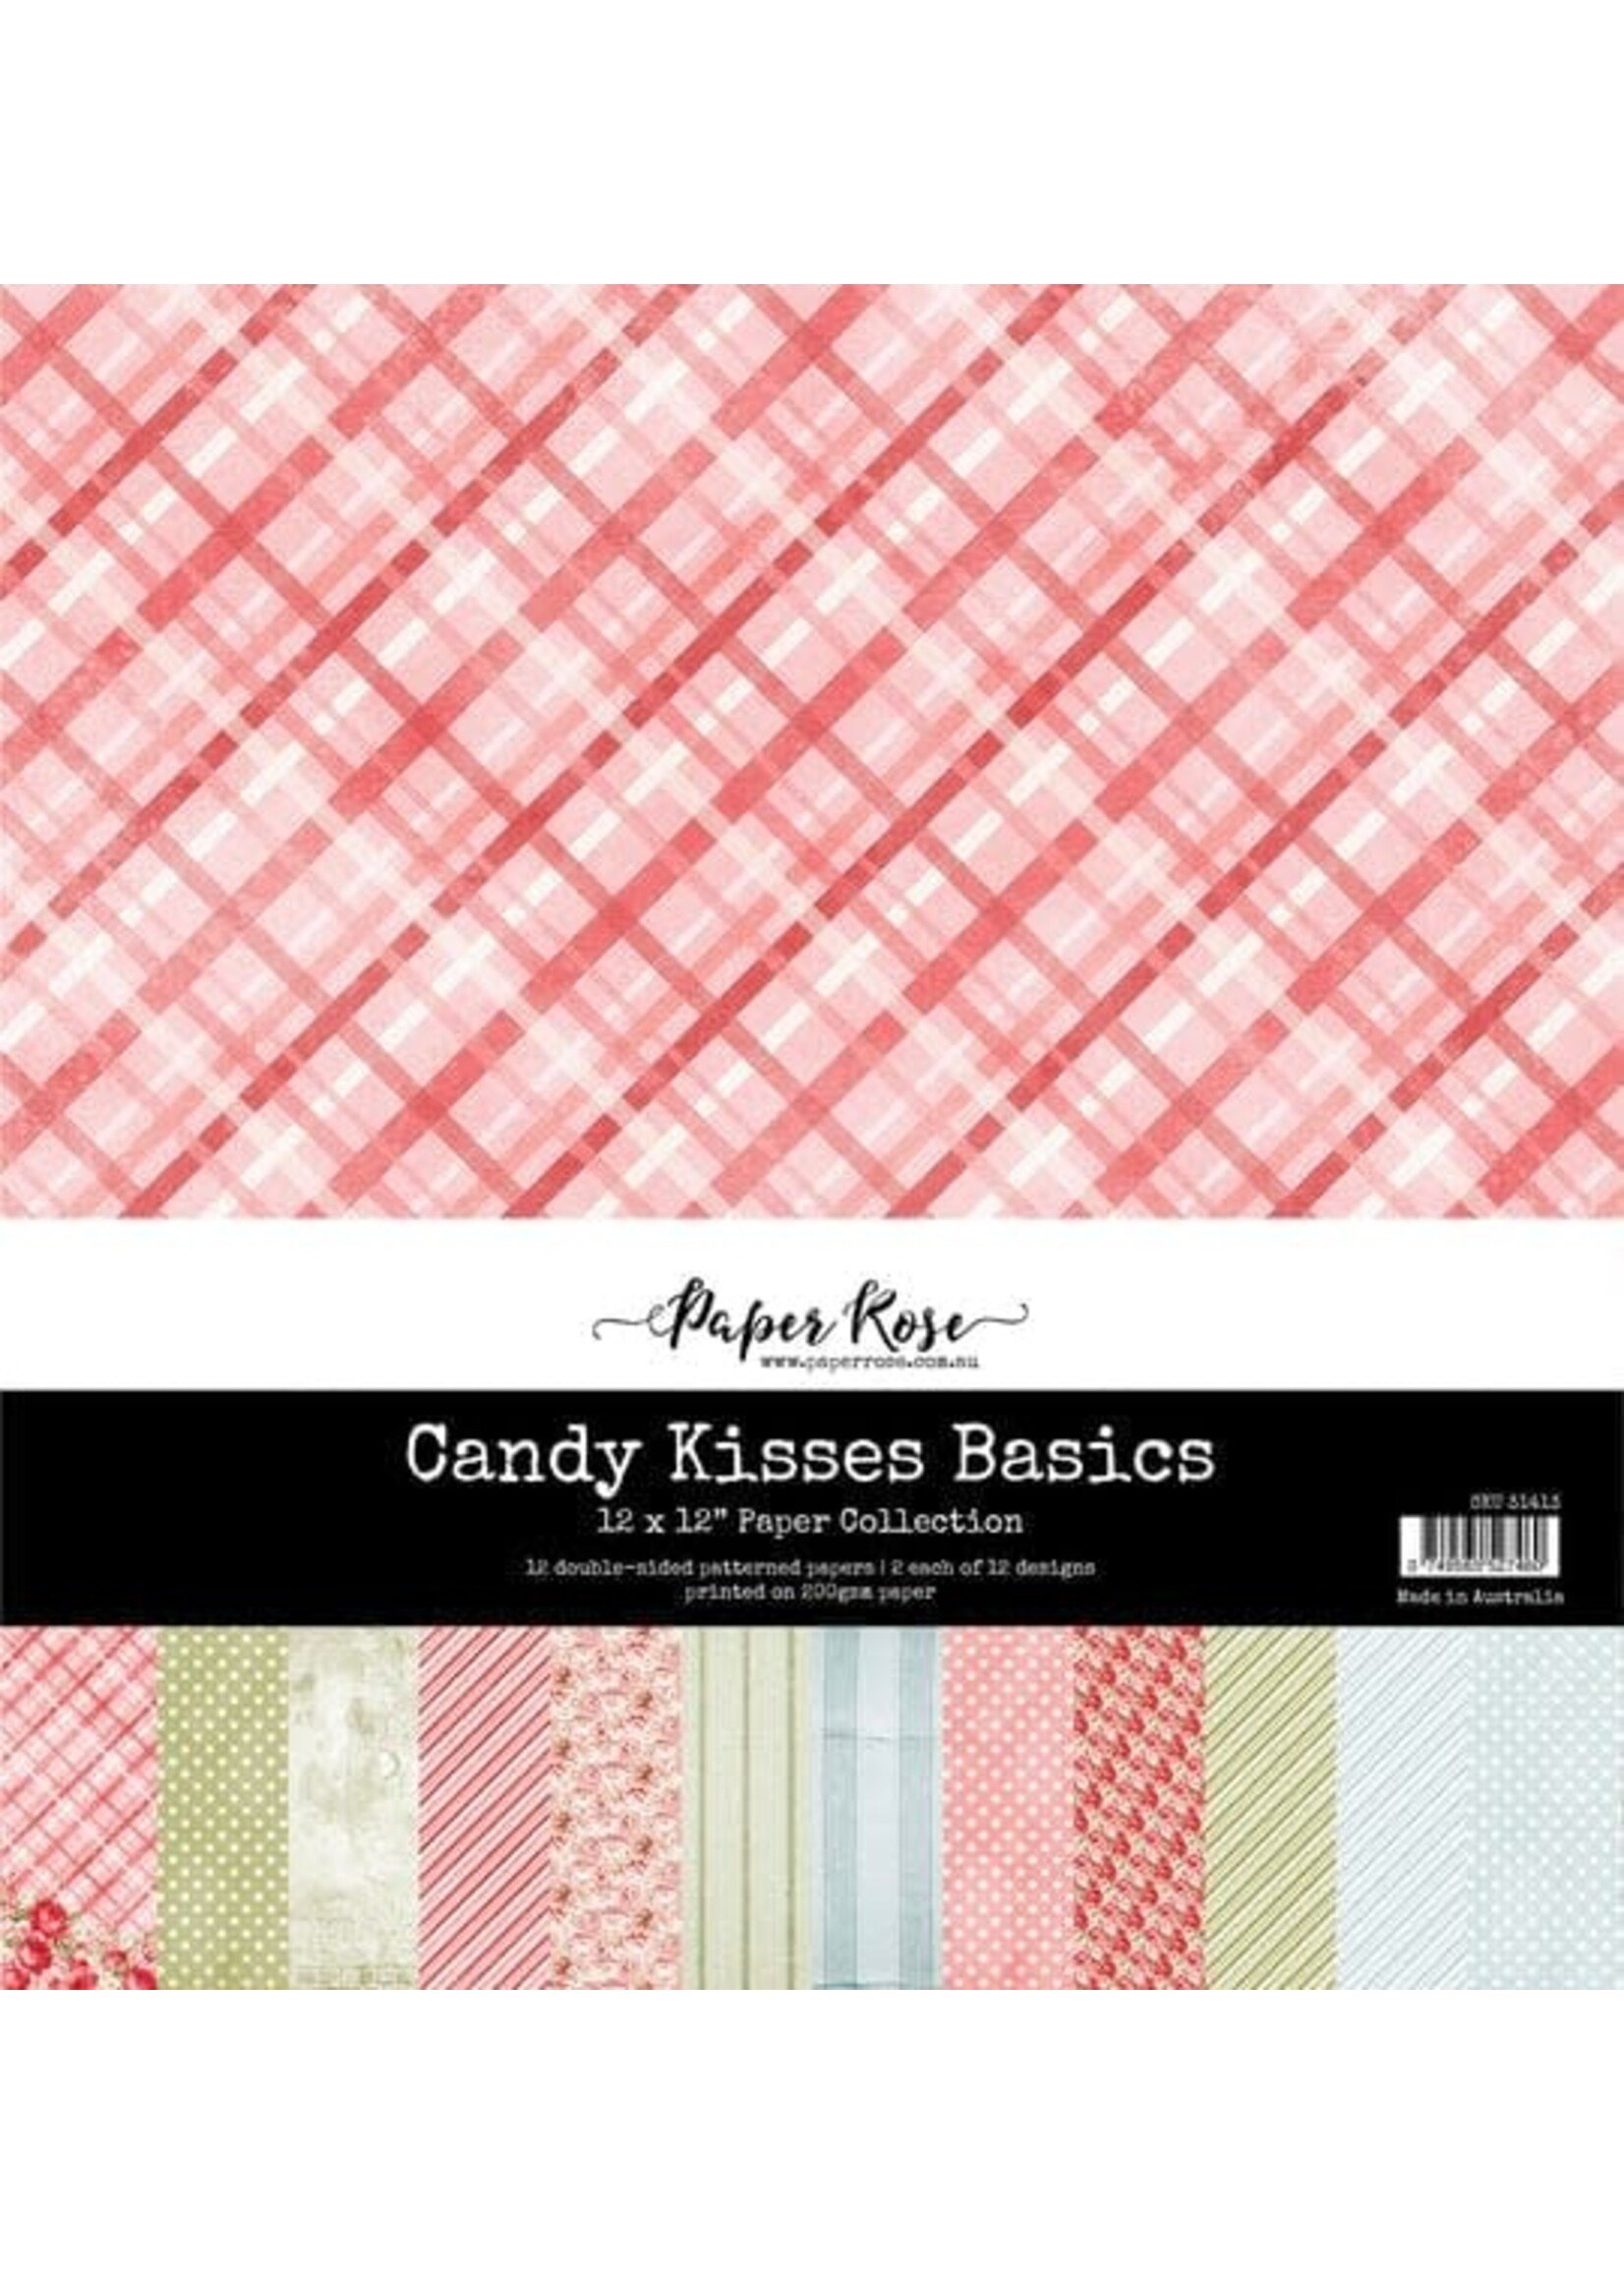 Paper Rose Paper Rose - Candy Kisses Basics 12x12 Paper Collection